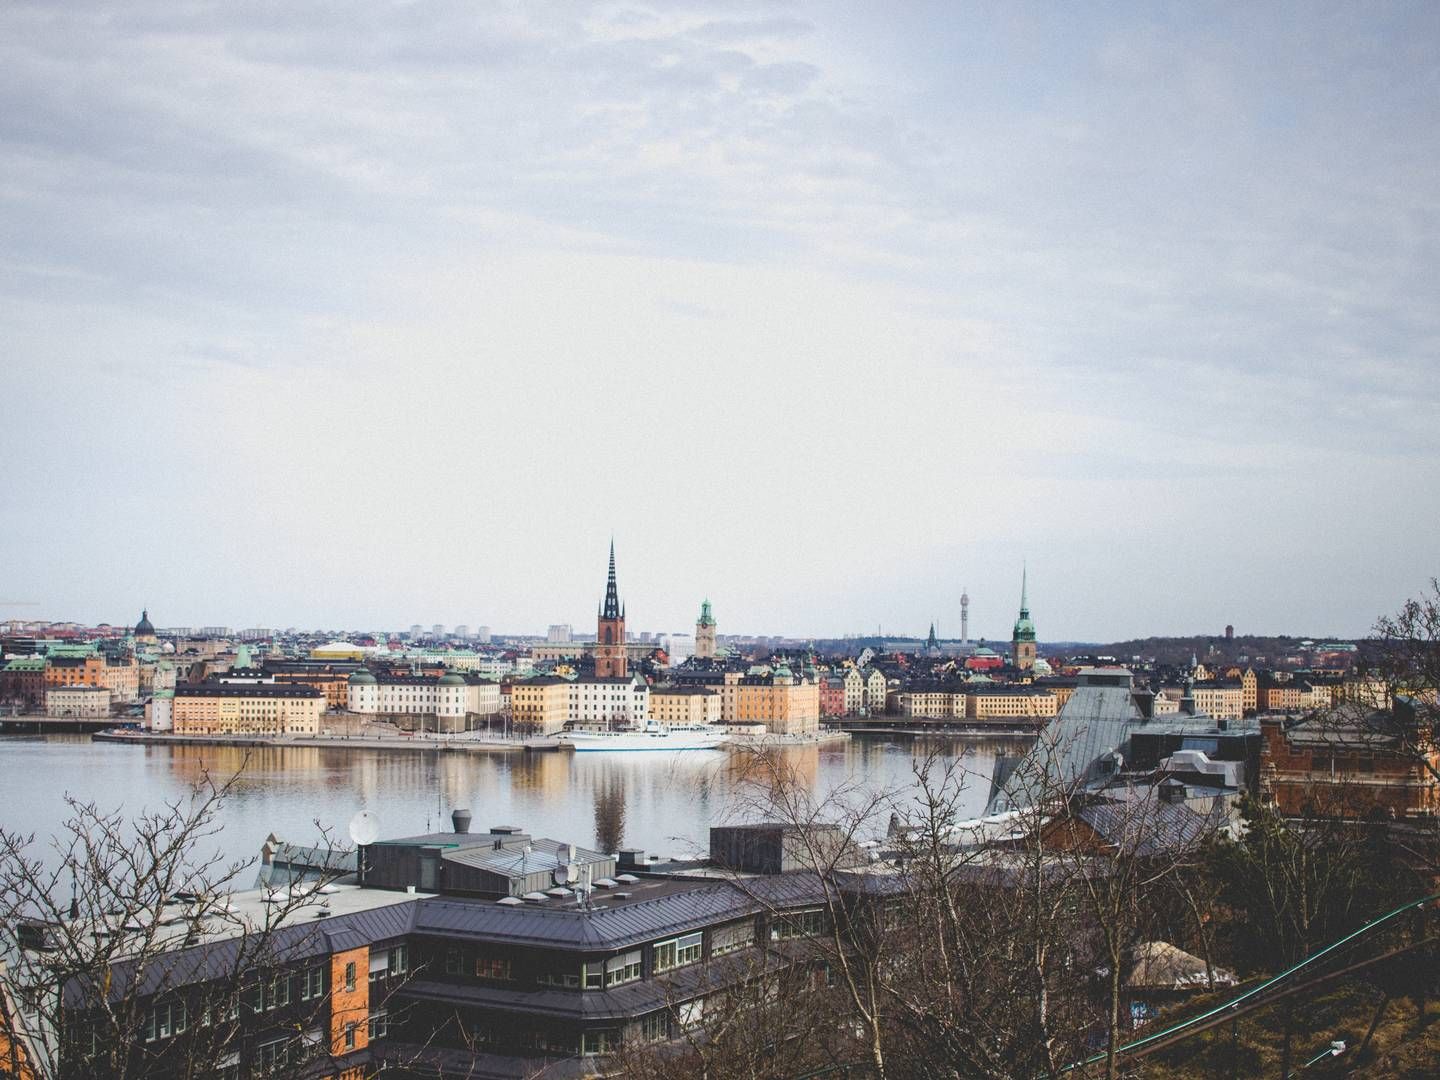 Stockholm-based AMF's Swedish equity investments pulled in a return of 7.2% in H1 this year. | Photo: Pexels: Nadine Wuchenauer.